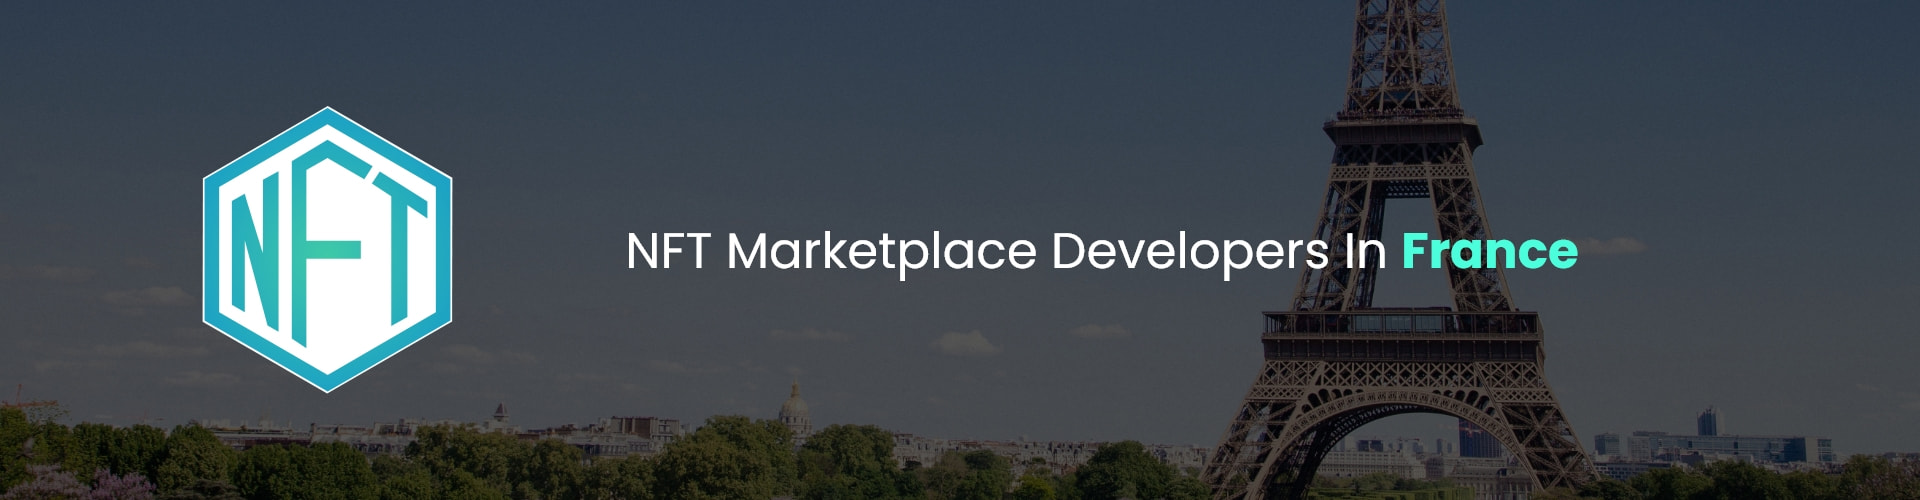 hire nft marketplace developers in france